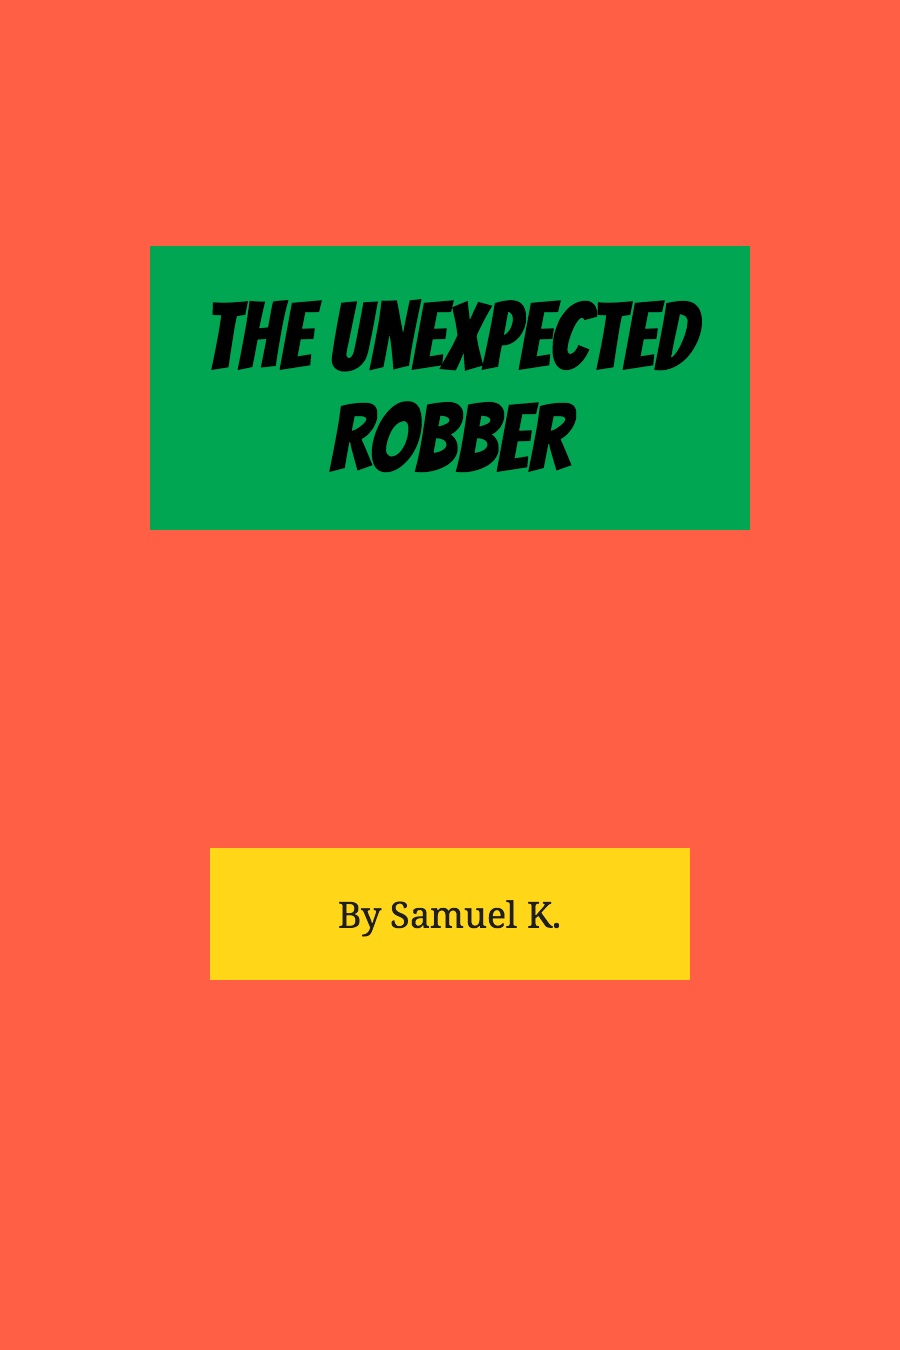 The Unexpected Robber by Samuel K